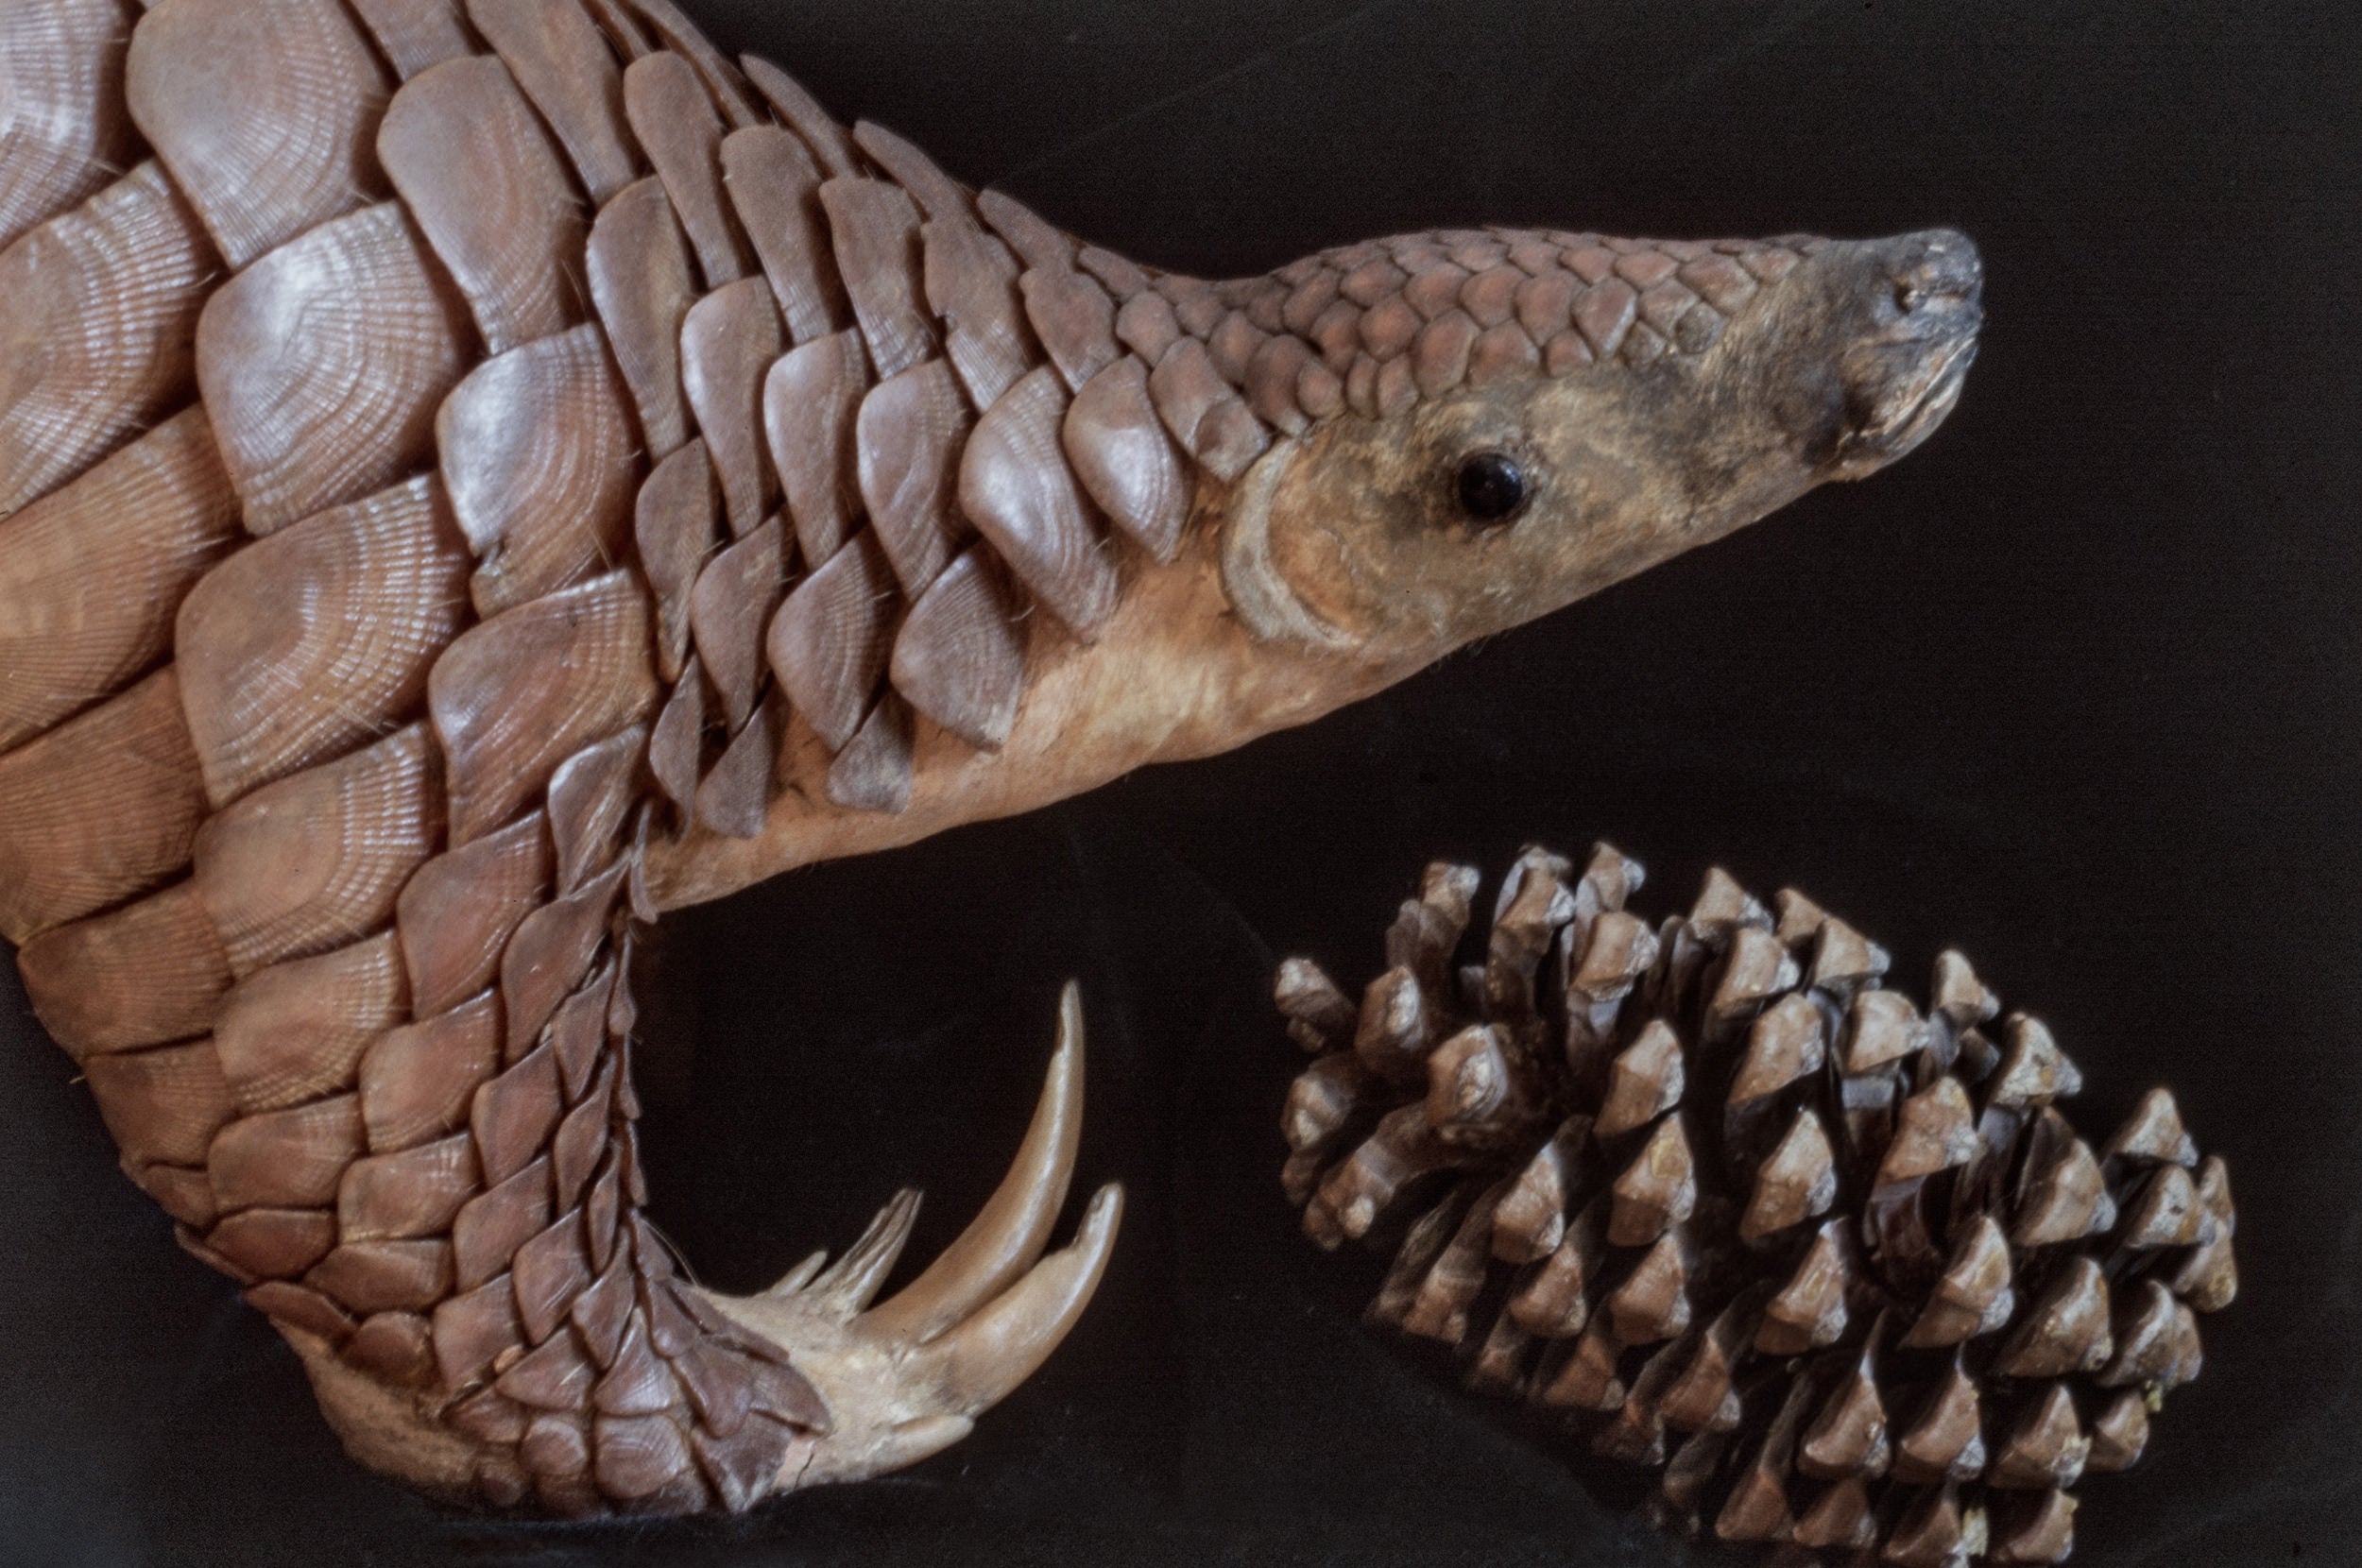 Preserved pangolin next to a pinecone.